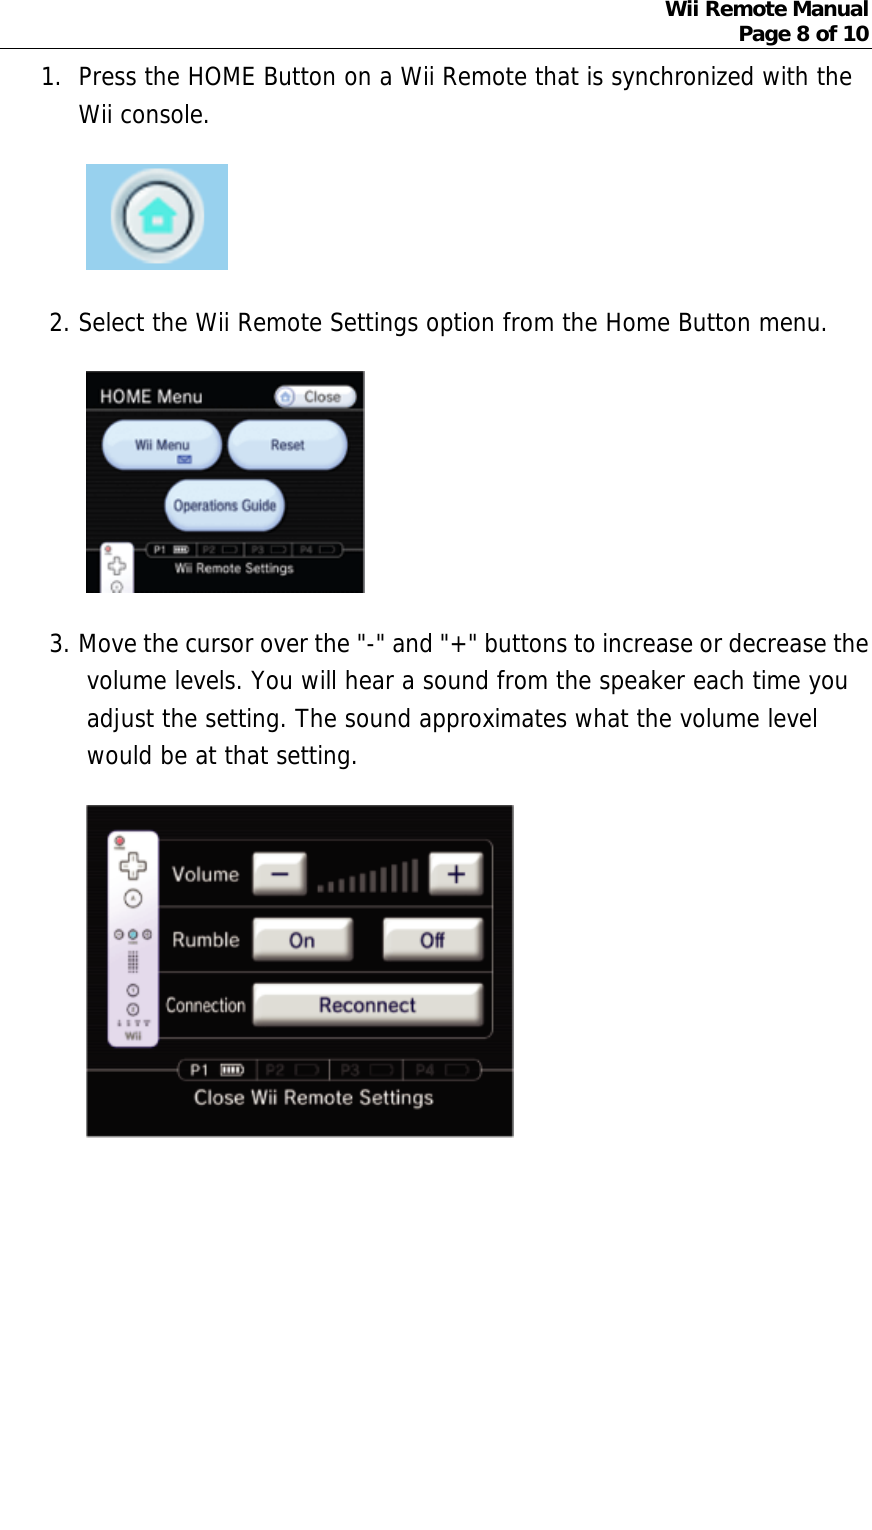 Wii Remote Manual Page 8 of 10  1. Press the HOME Button on a Wii Remote that is synchronized with the Wii console.   2. Select the Wii Remote Settings option from the Home Button menu.   3. Move the cursor over the &quot;-&quot; and &quot;+&quot; buttons to increase or decrease the volume levels. You will hear a sound from the speaker each time you adjust the setting. The sound approximates what the volume level would be at that setting.        